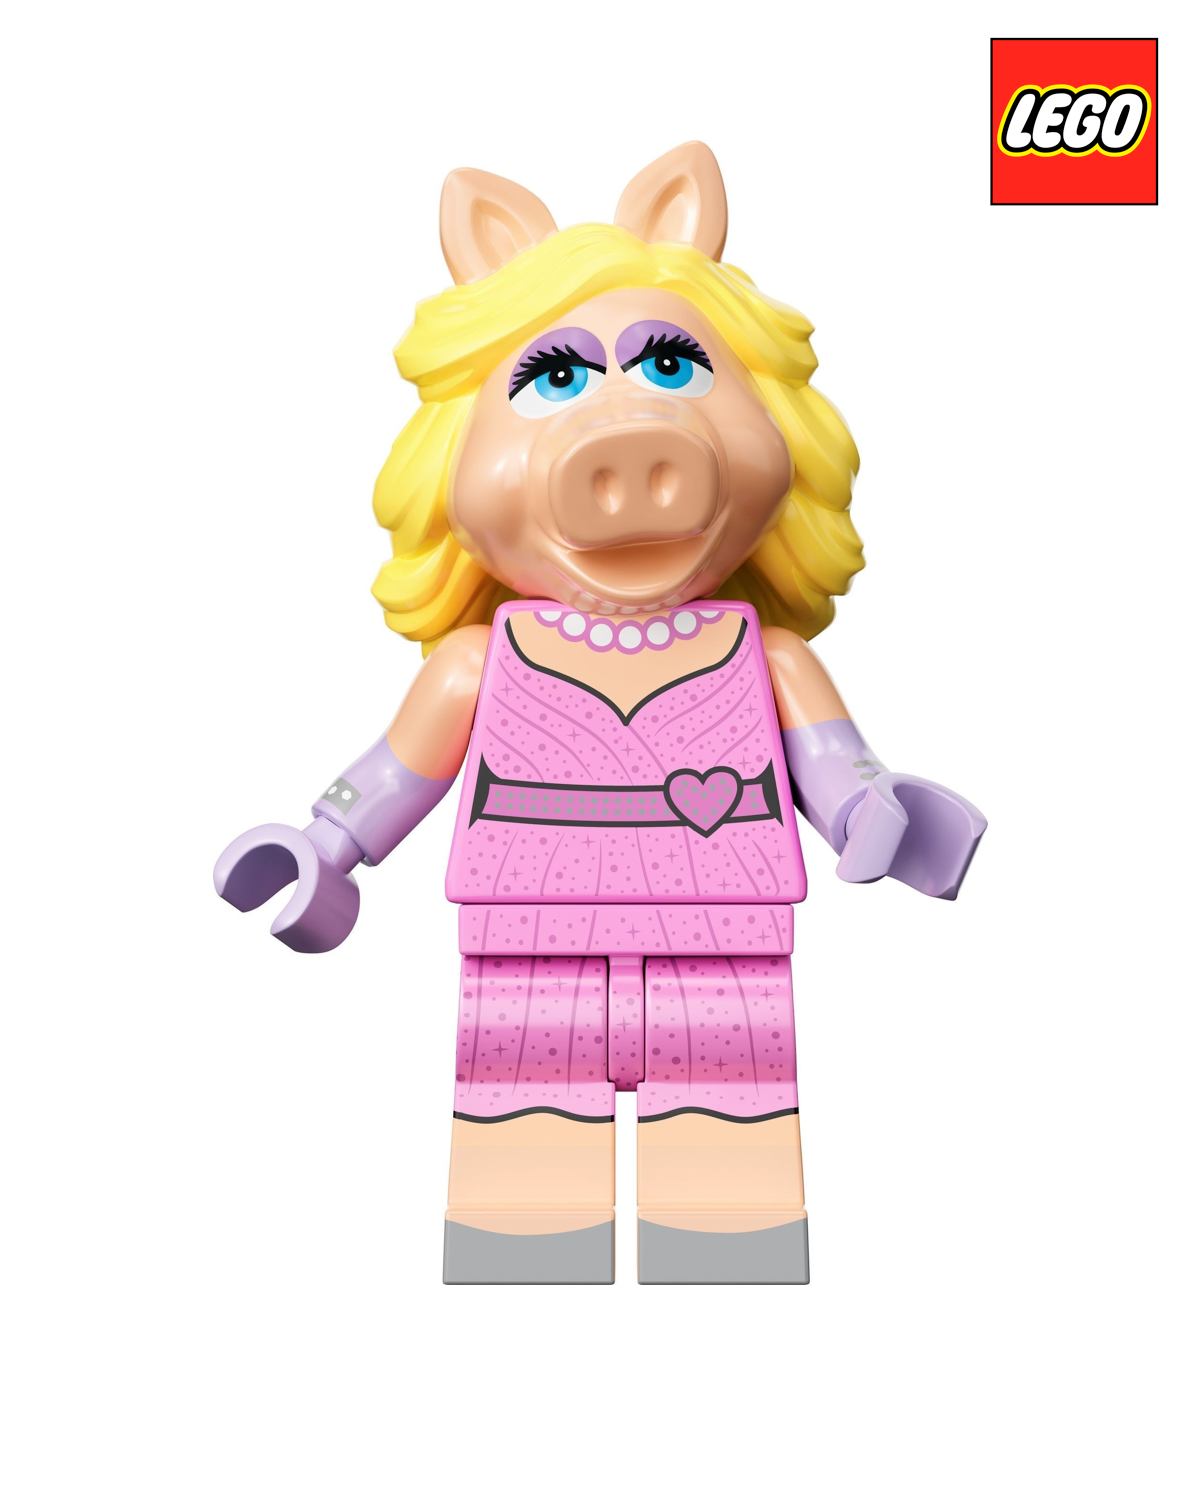 Miss Piggy - The Muppets | LEGO Minifigure | The Muppets